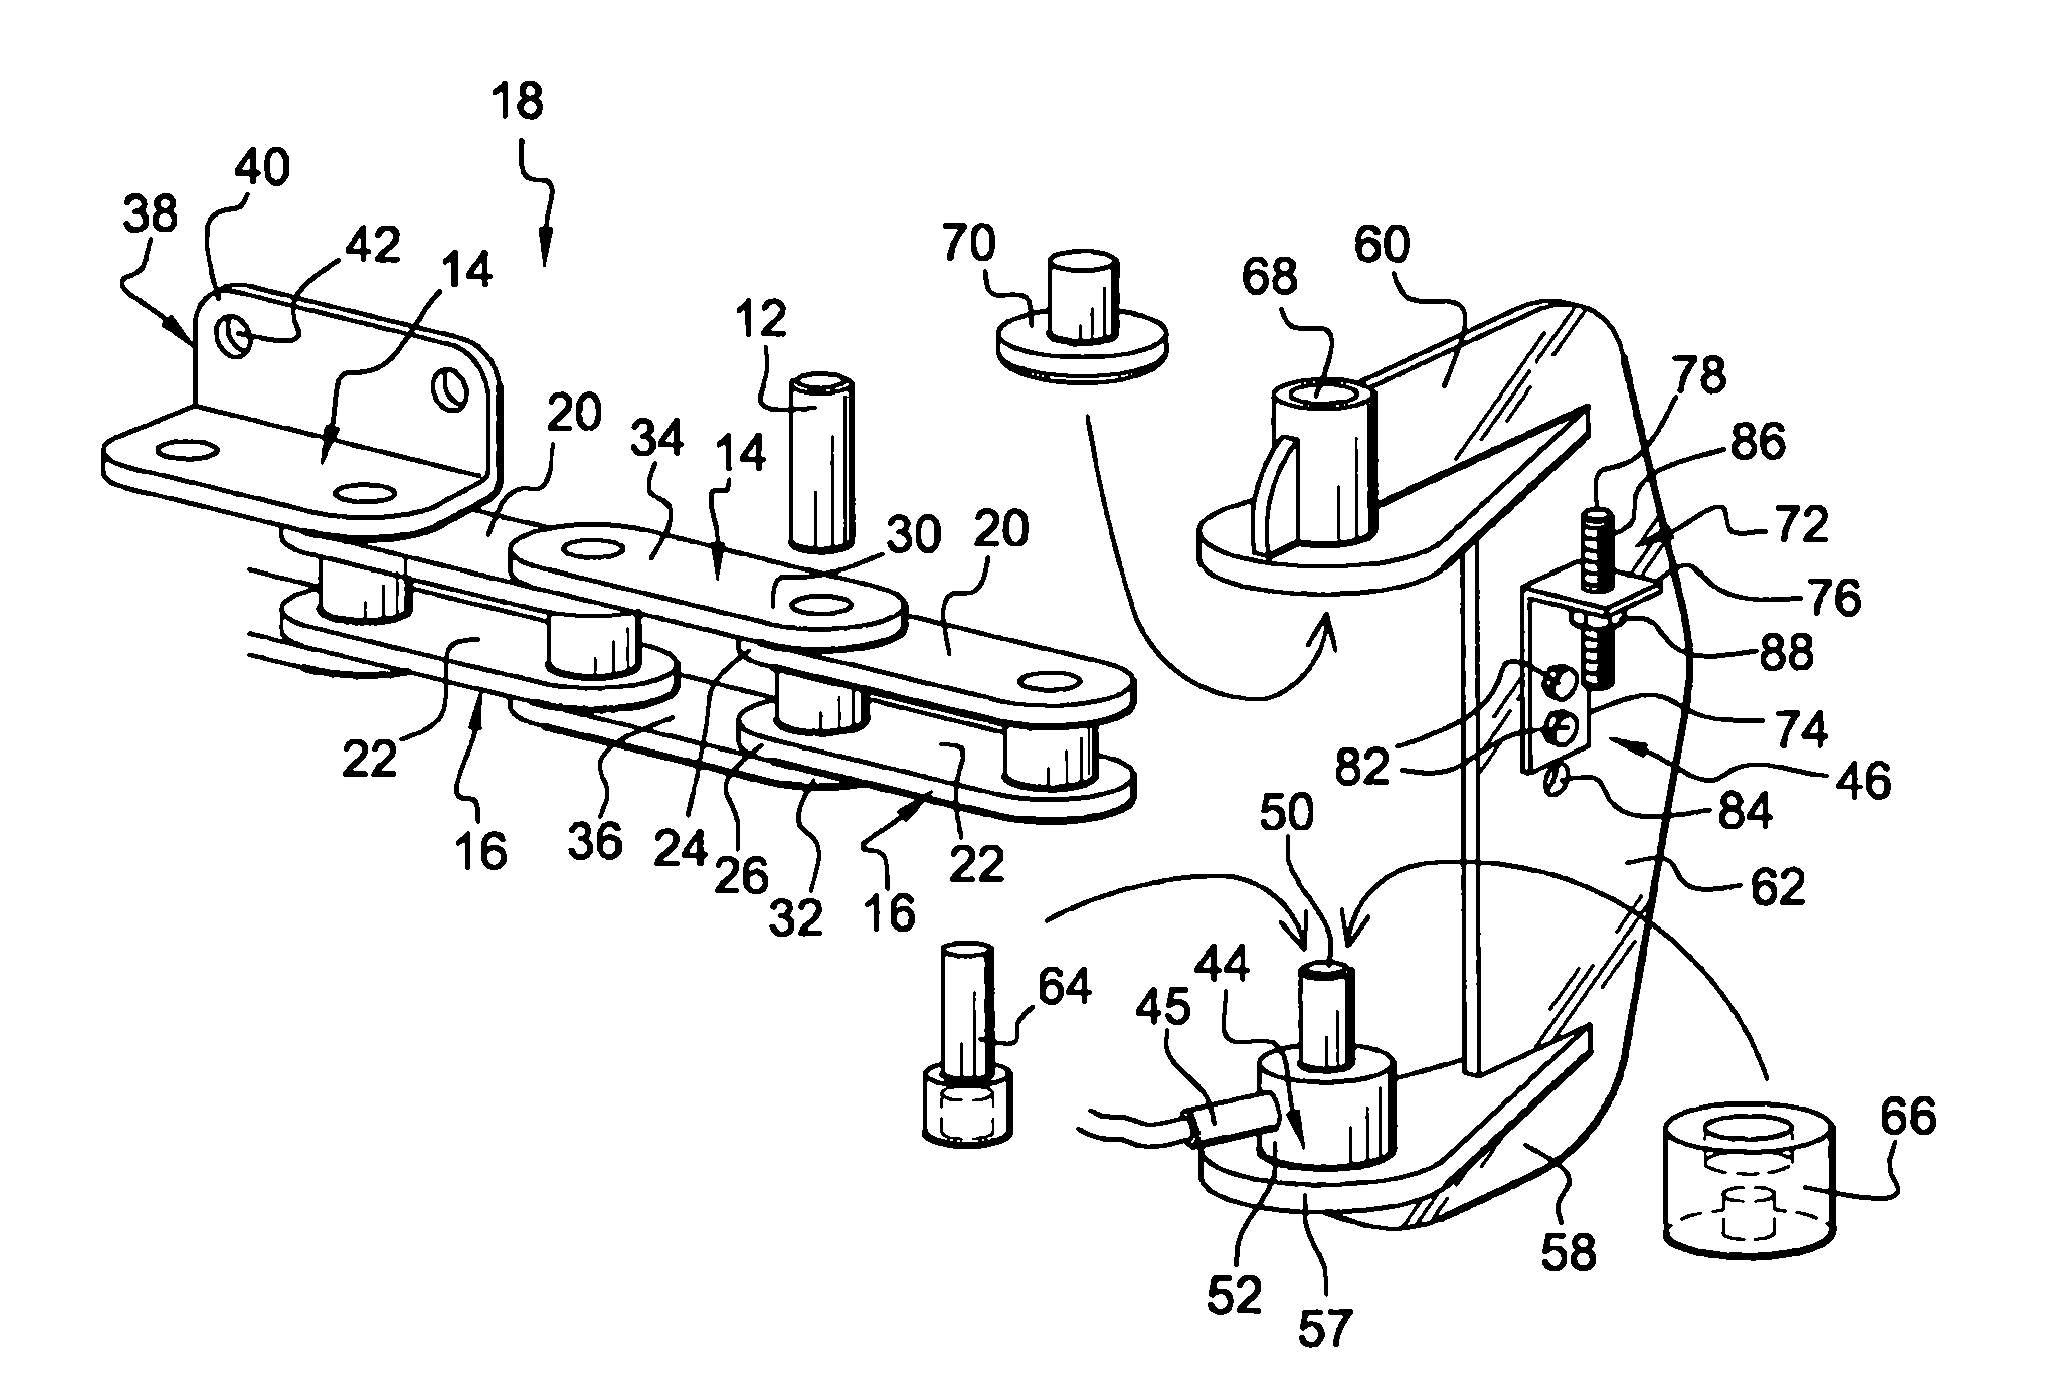 Improvement to device for inserting and extracting chain link pivot pins